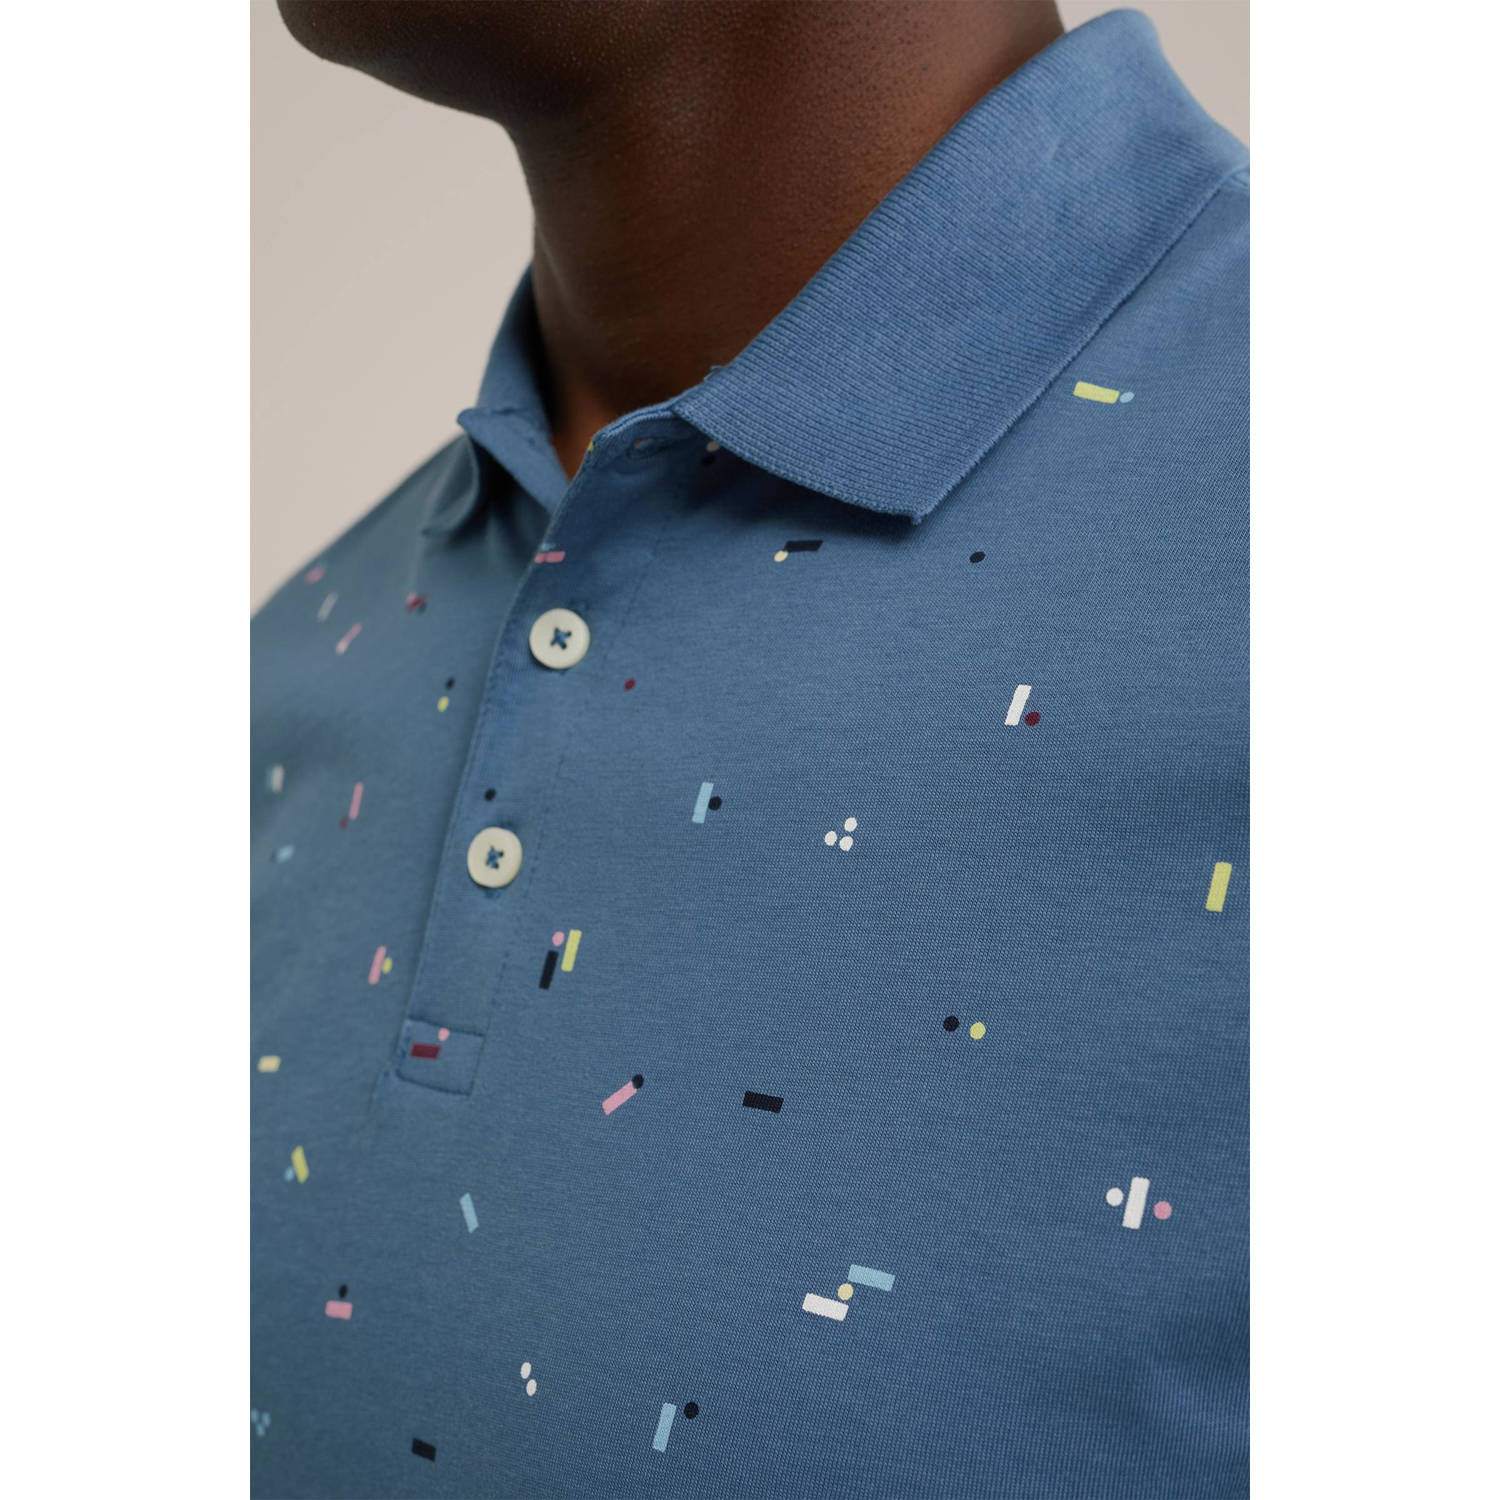 WE Fashion polo met all over print blue water